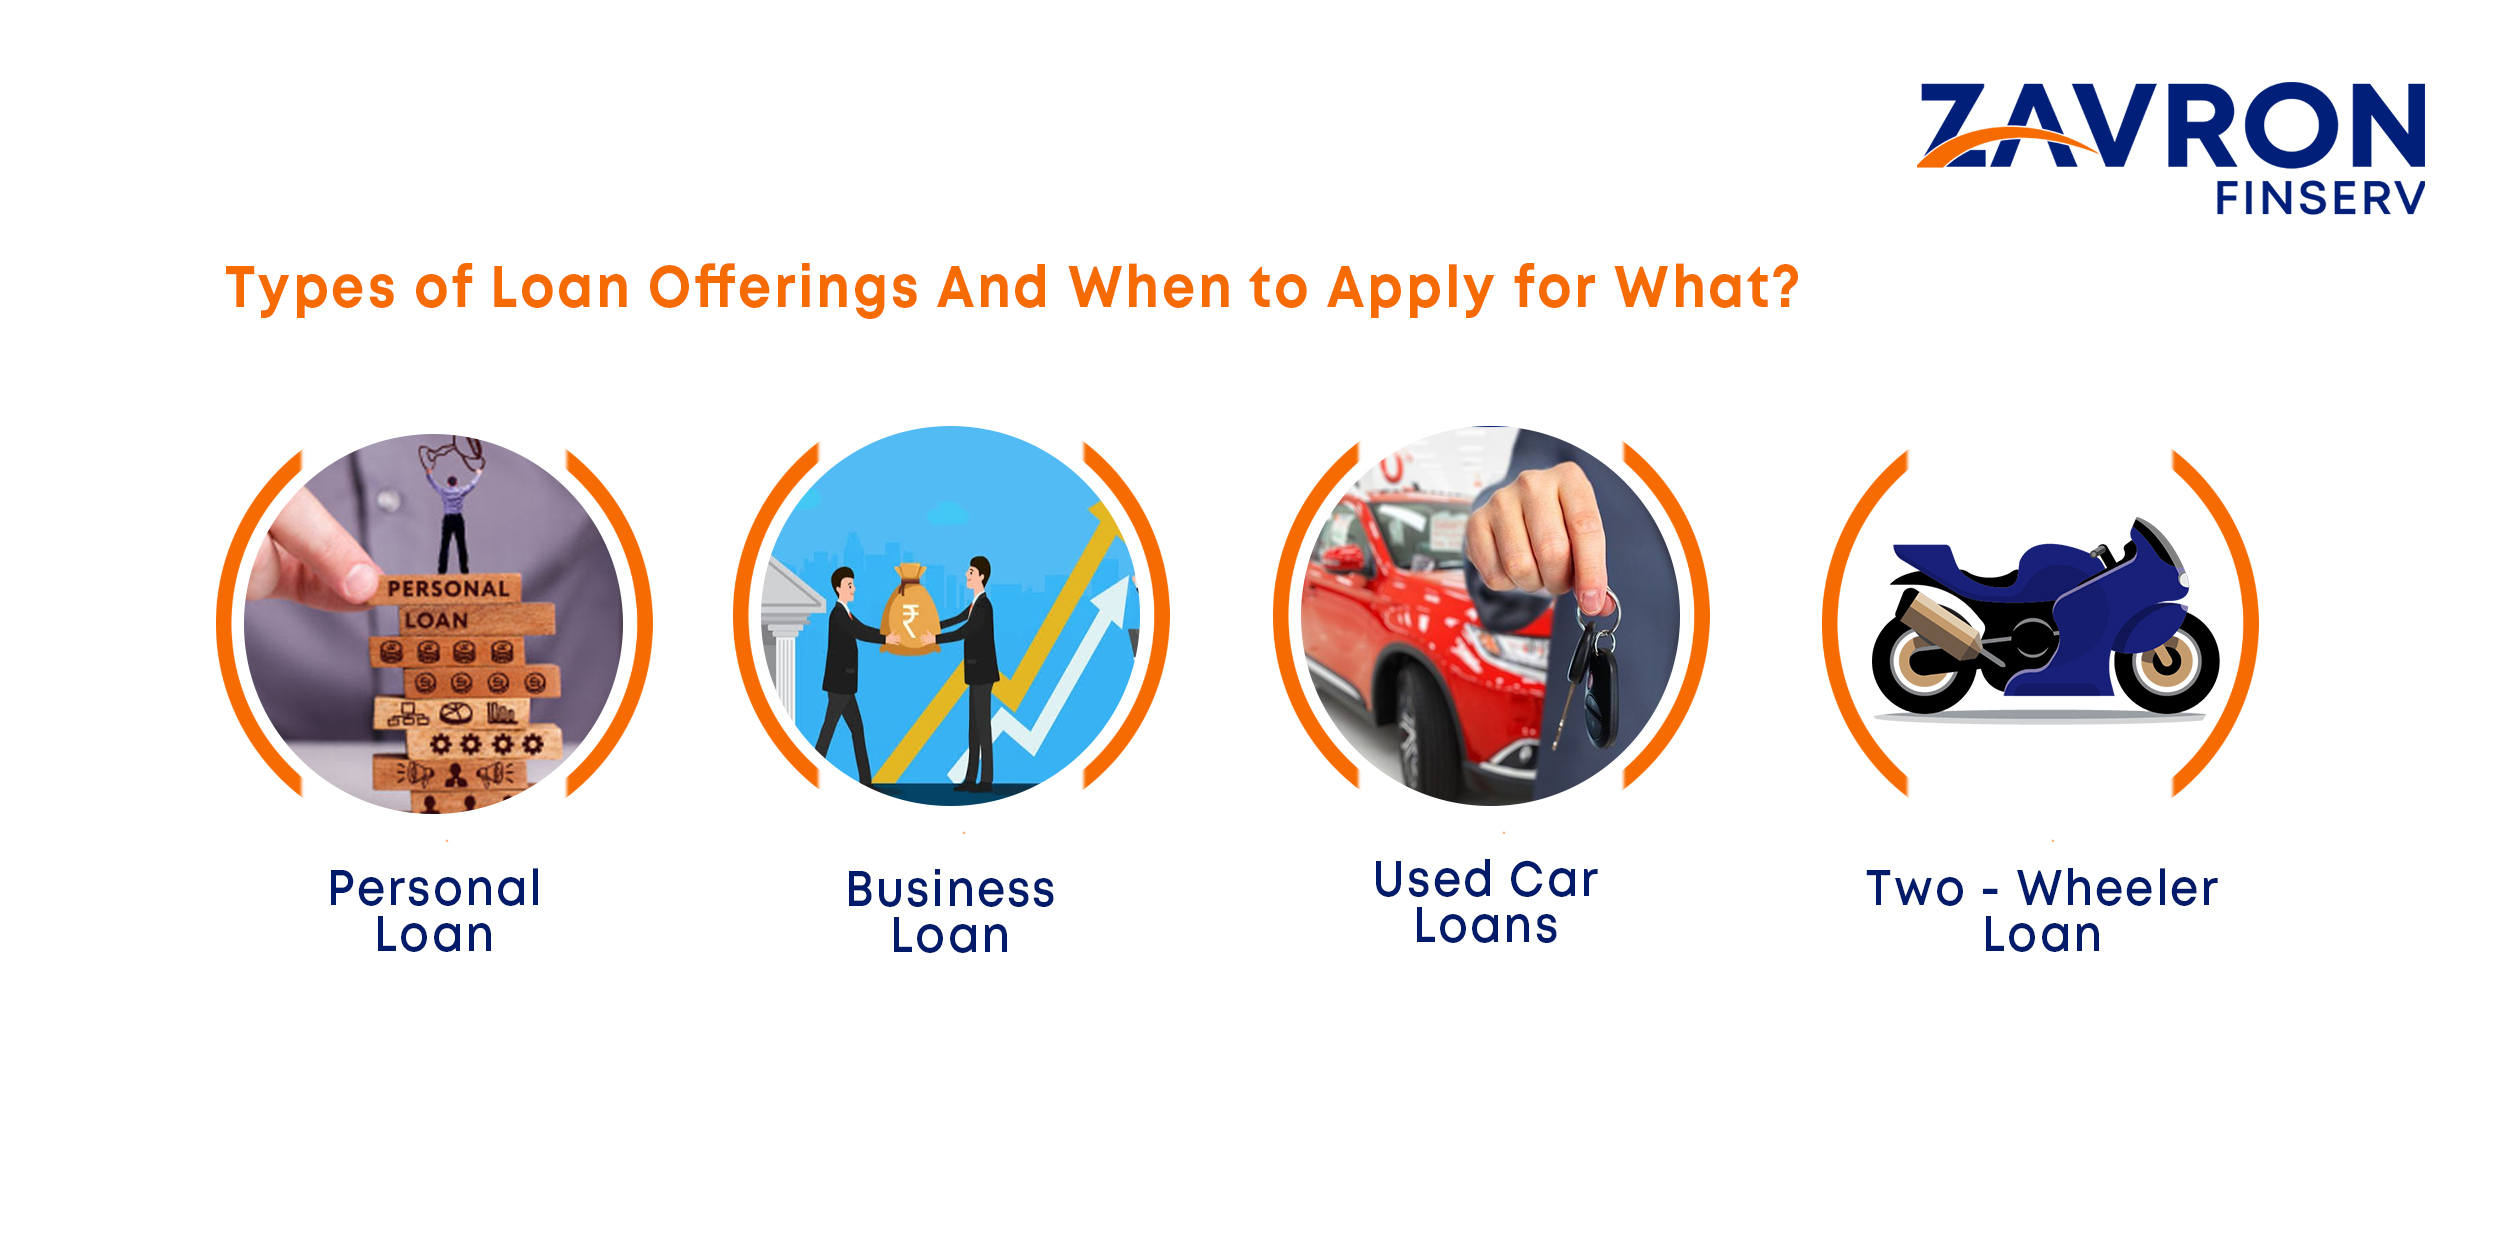 Types of Loan Offerings And When to Apply for What? - A Complete Guide by Zavron Finserv